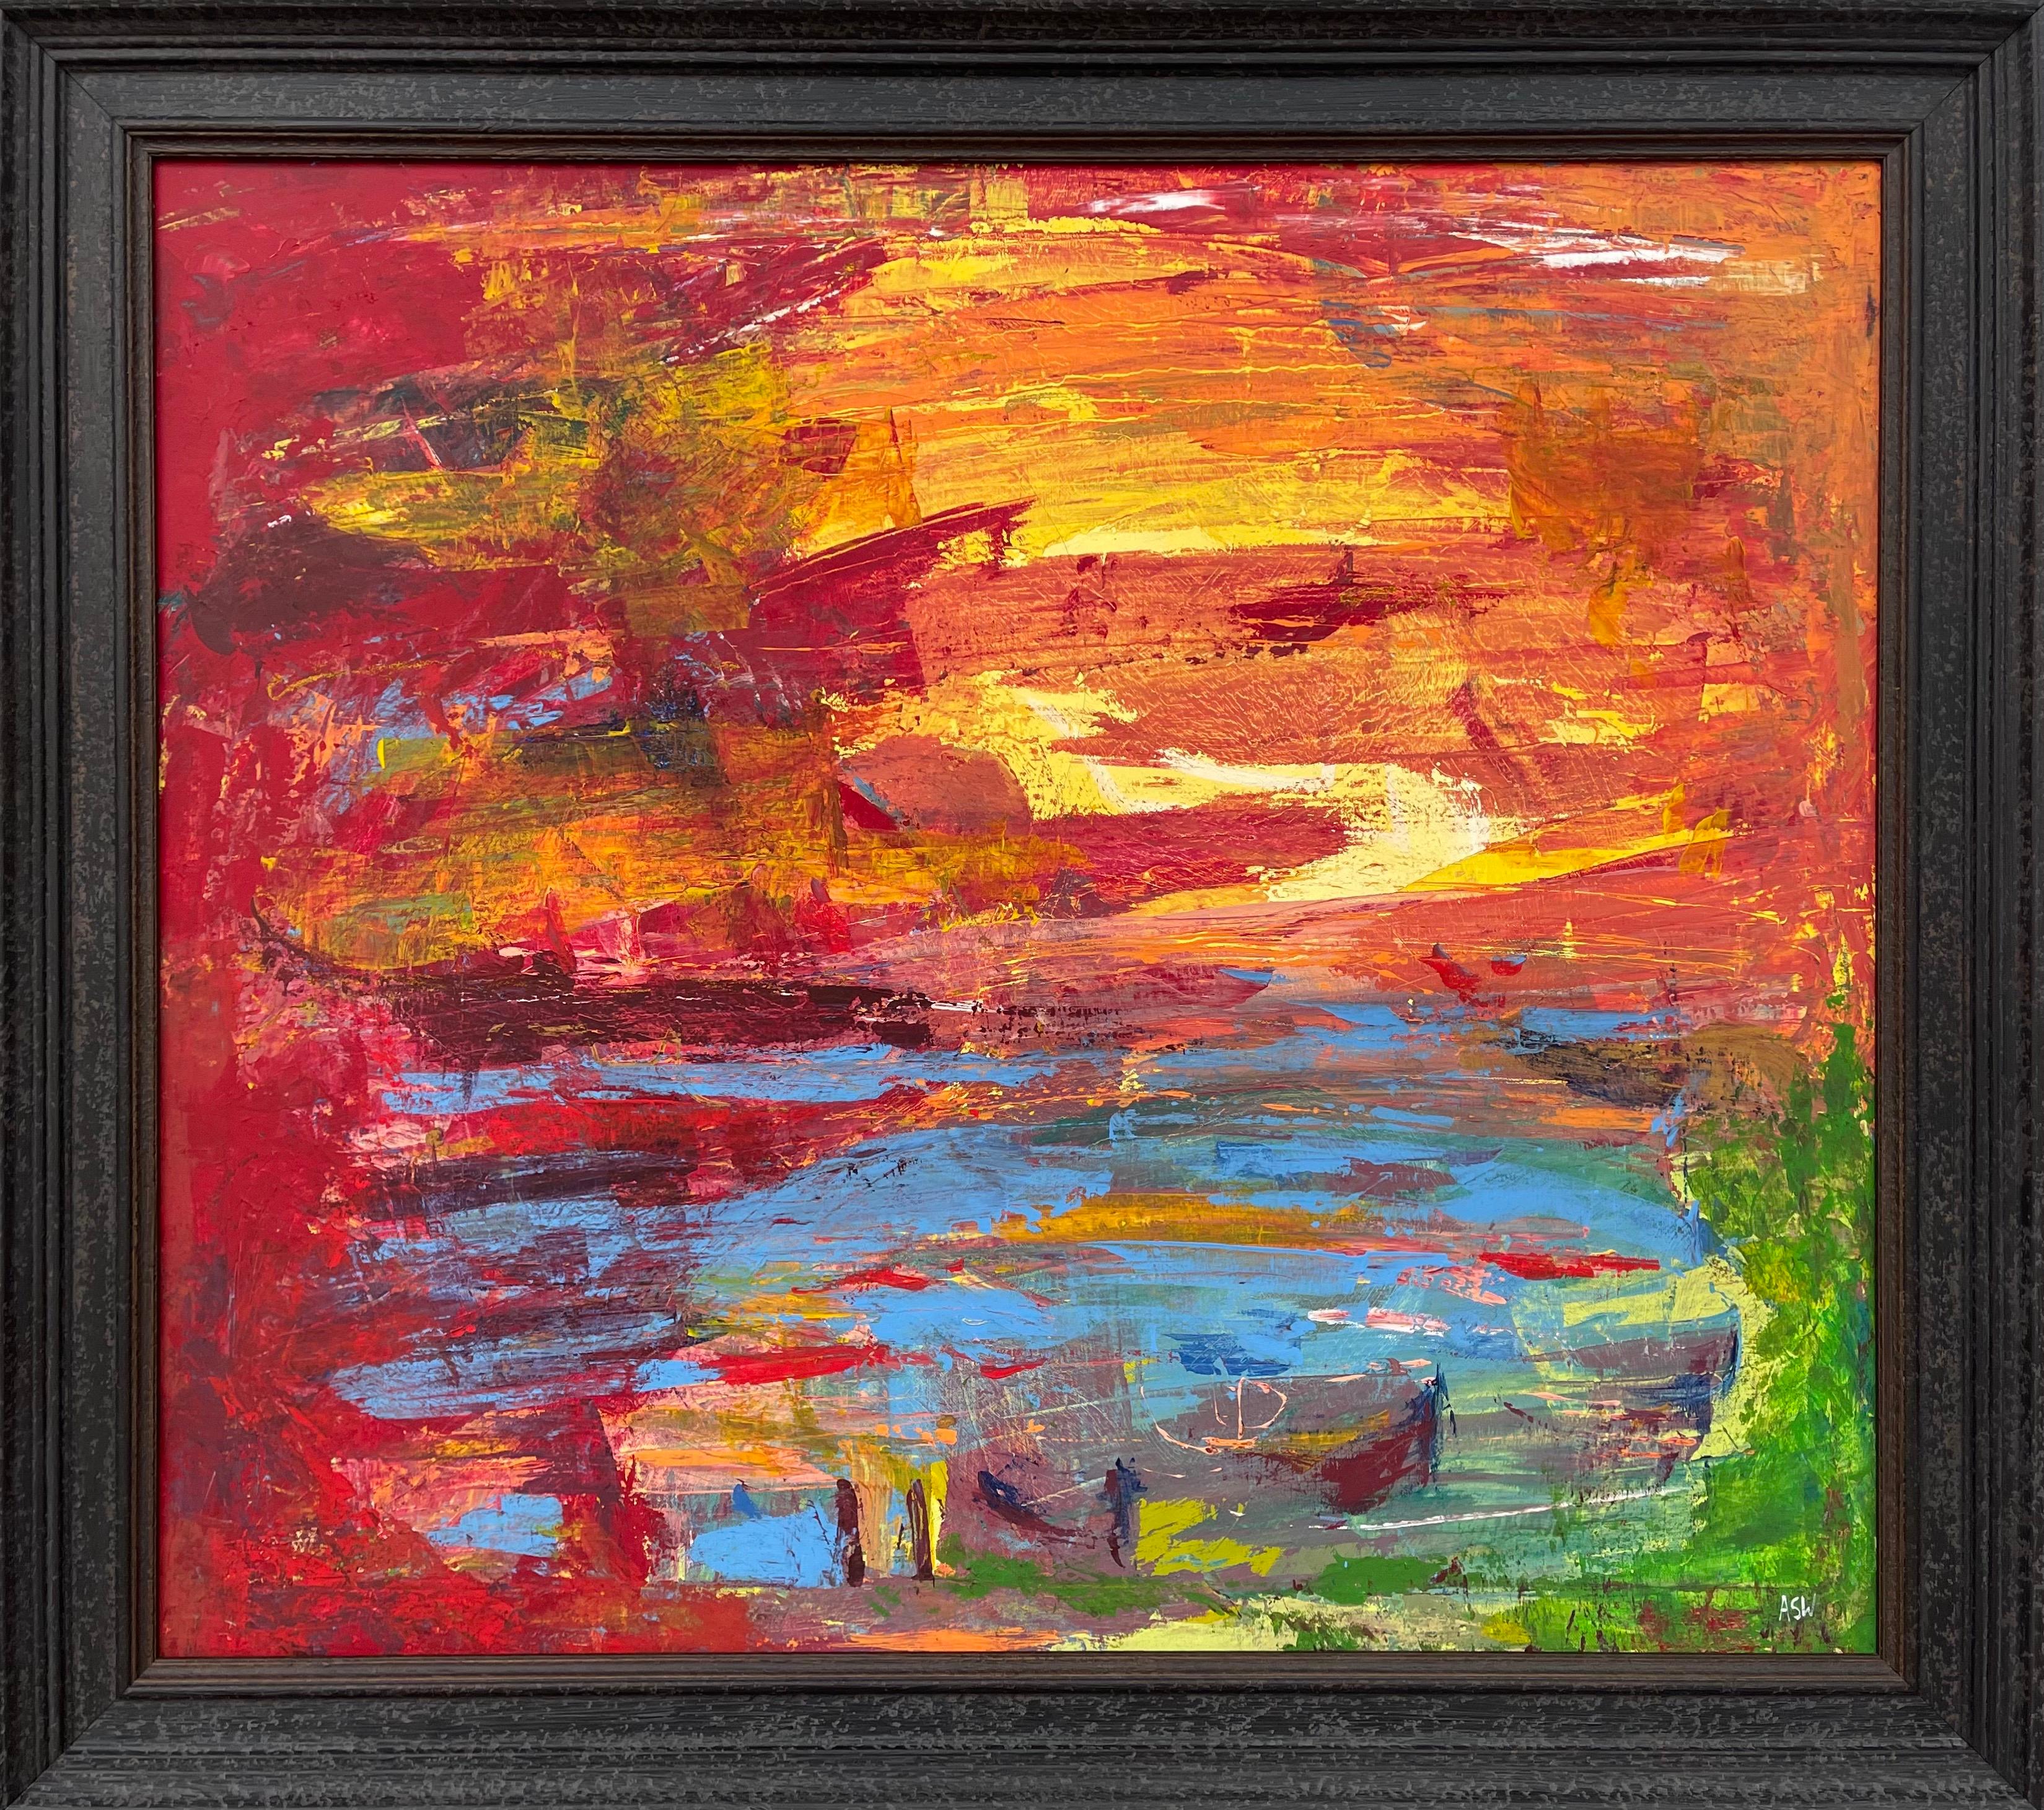 Abstract Blue Orange & Red Lake Sunset Landscape by Contemporary British Artist - Mixed Media Art by Angela Wakefield